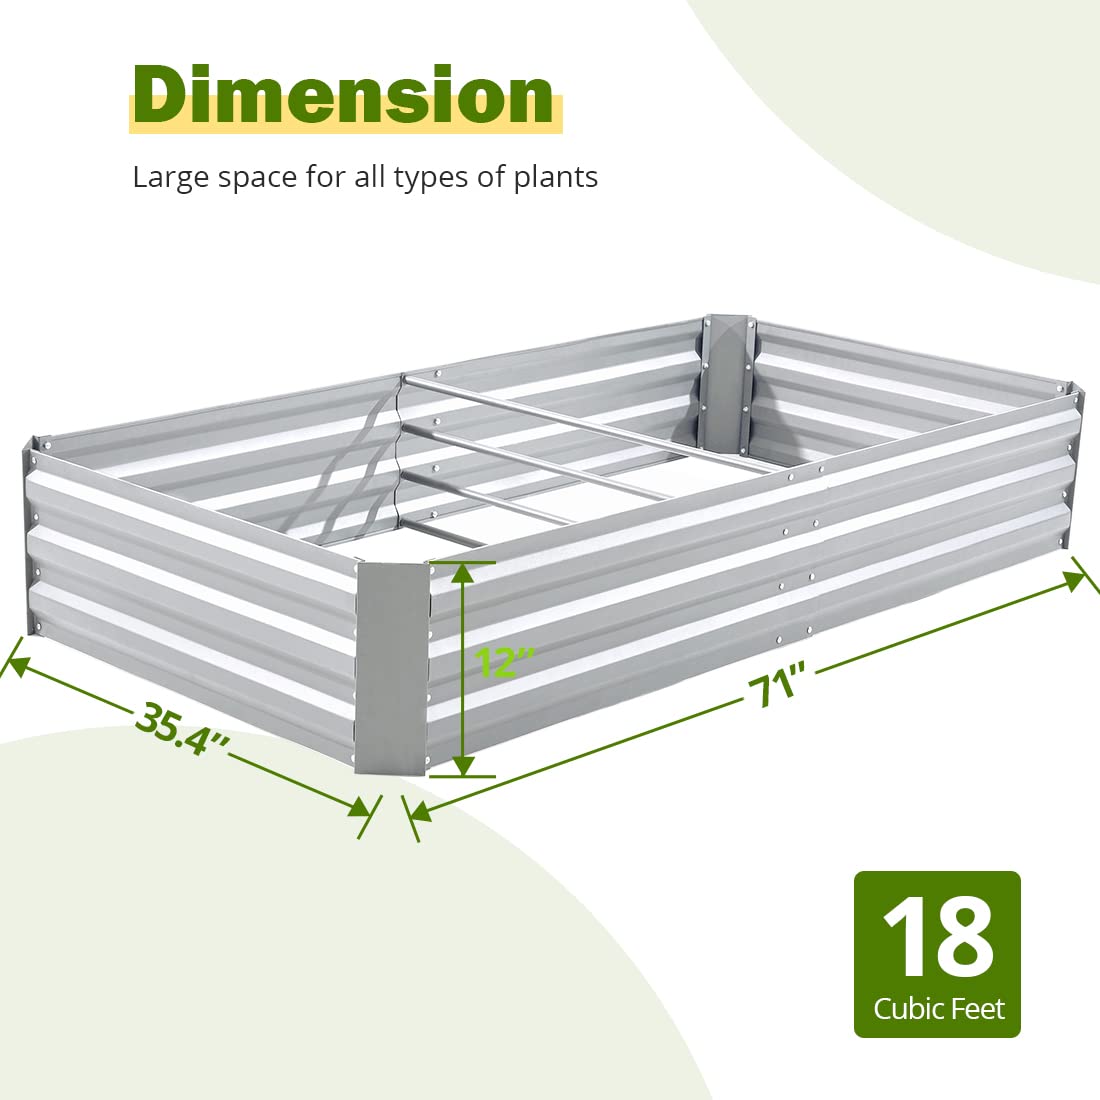 6x3x1 silver garden bed dimension#size_6x3x1ft